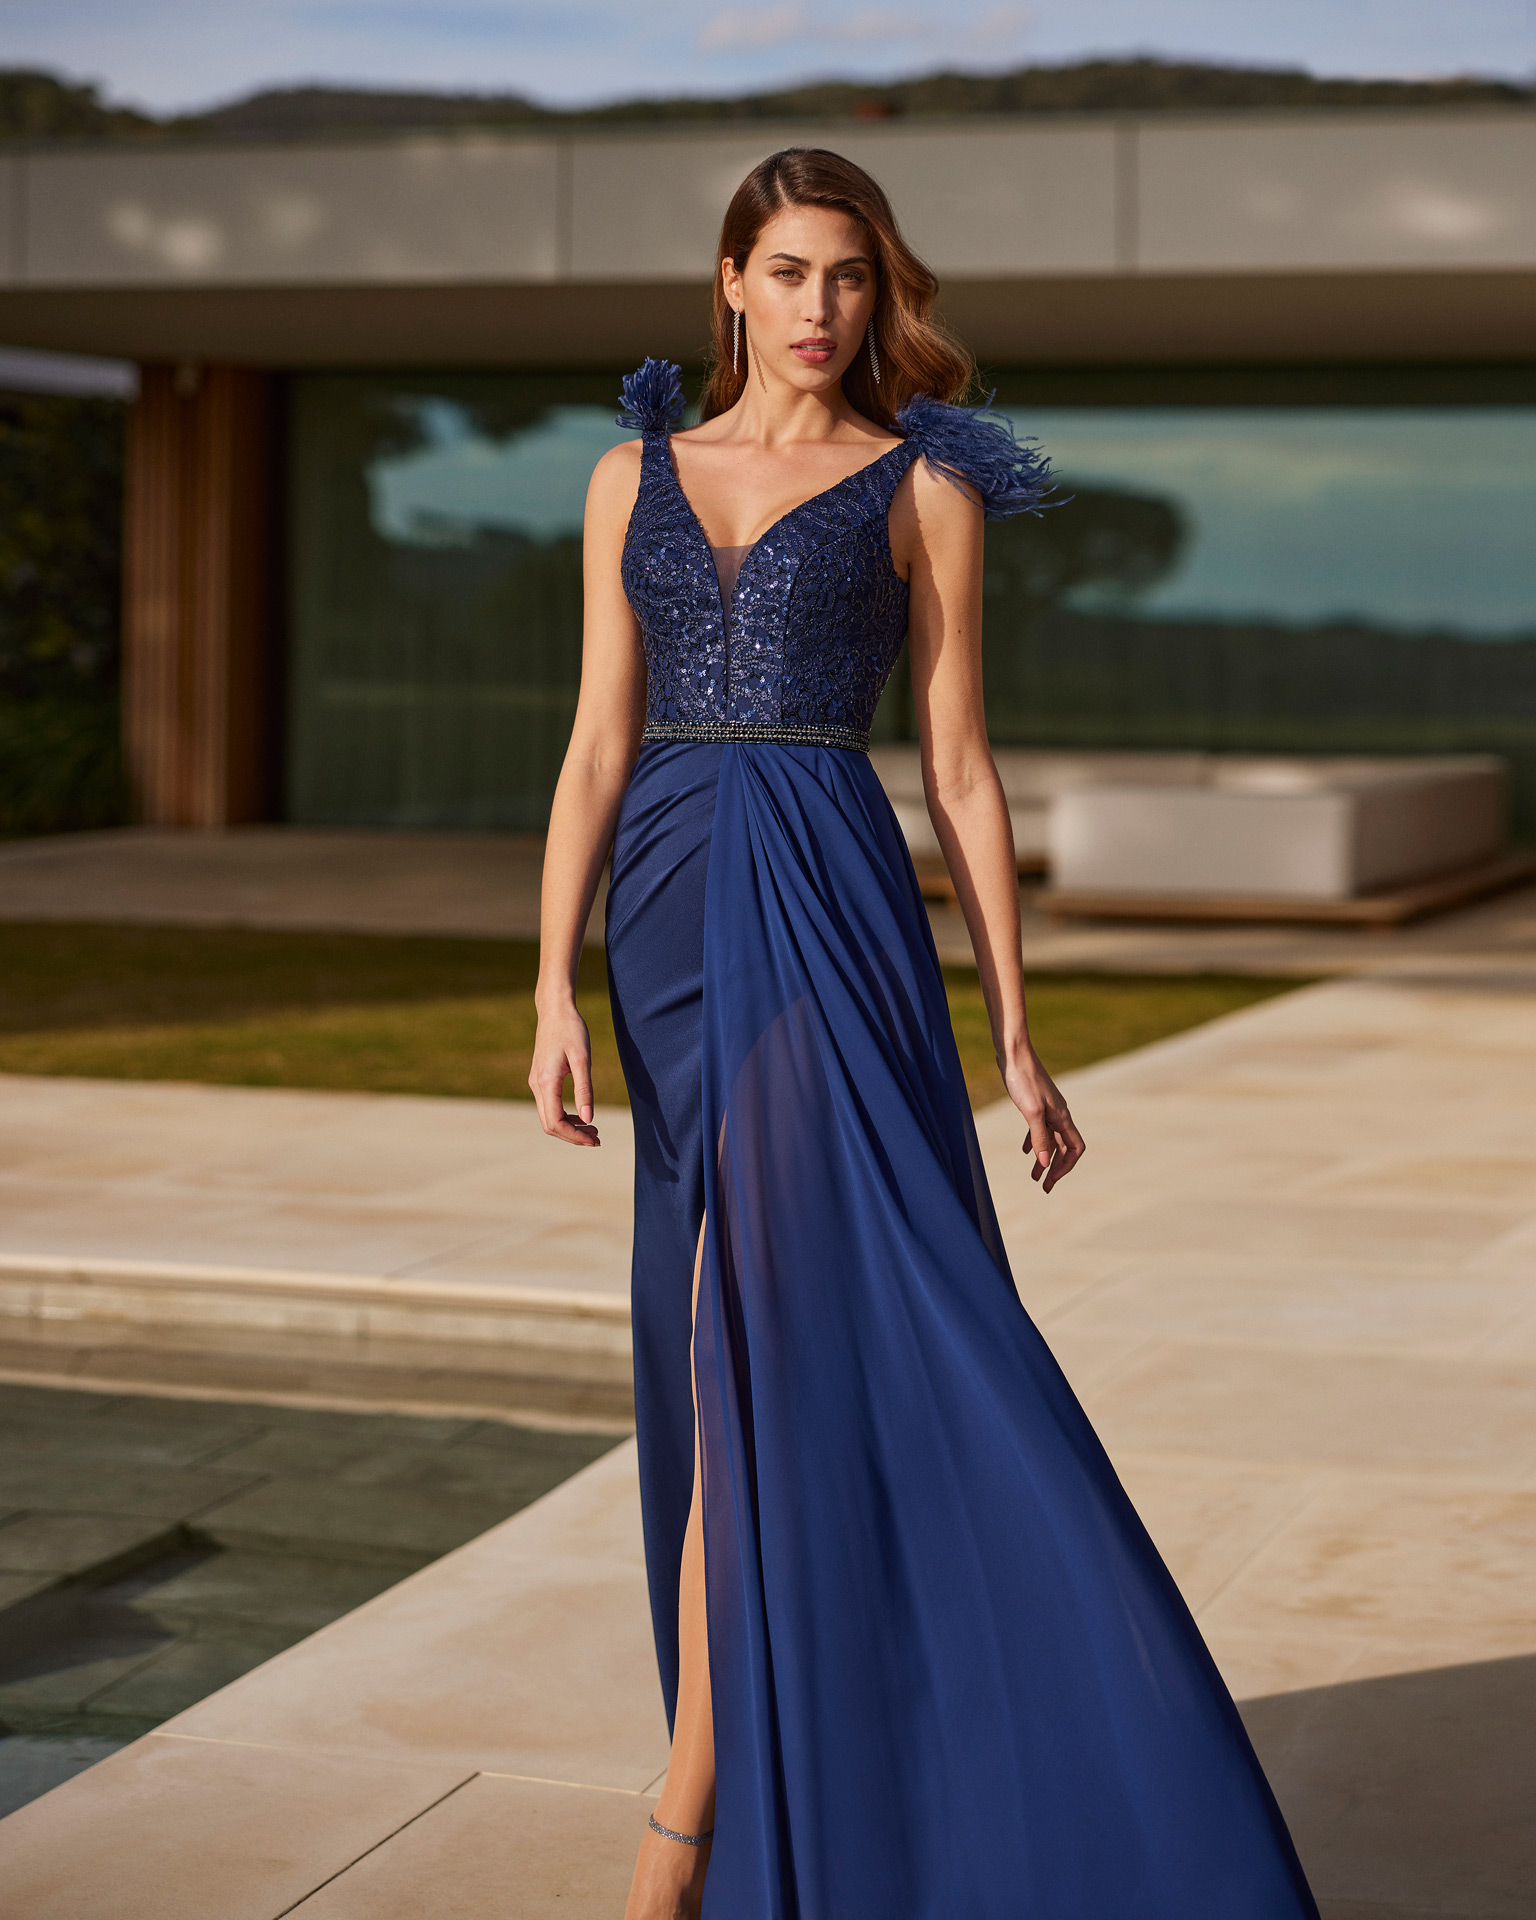 Fairytale style long evening dress. Crafted in crespon and beadwork. With a V-neckline and back with feathered straps. Marfil Barcelona design for parties and celebrations. MARFIL_BARCELONA.